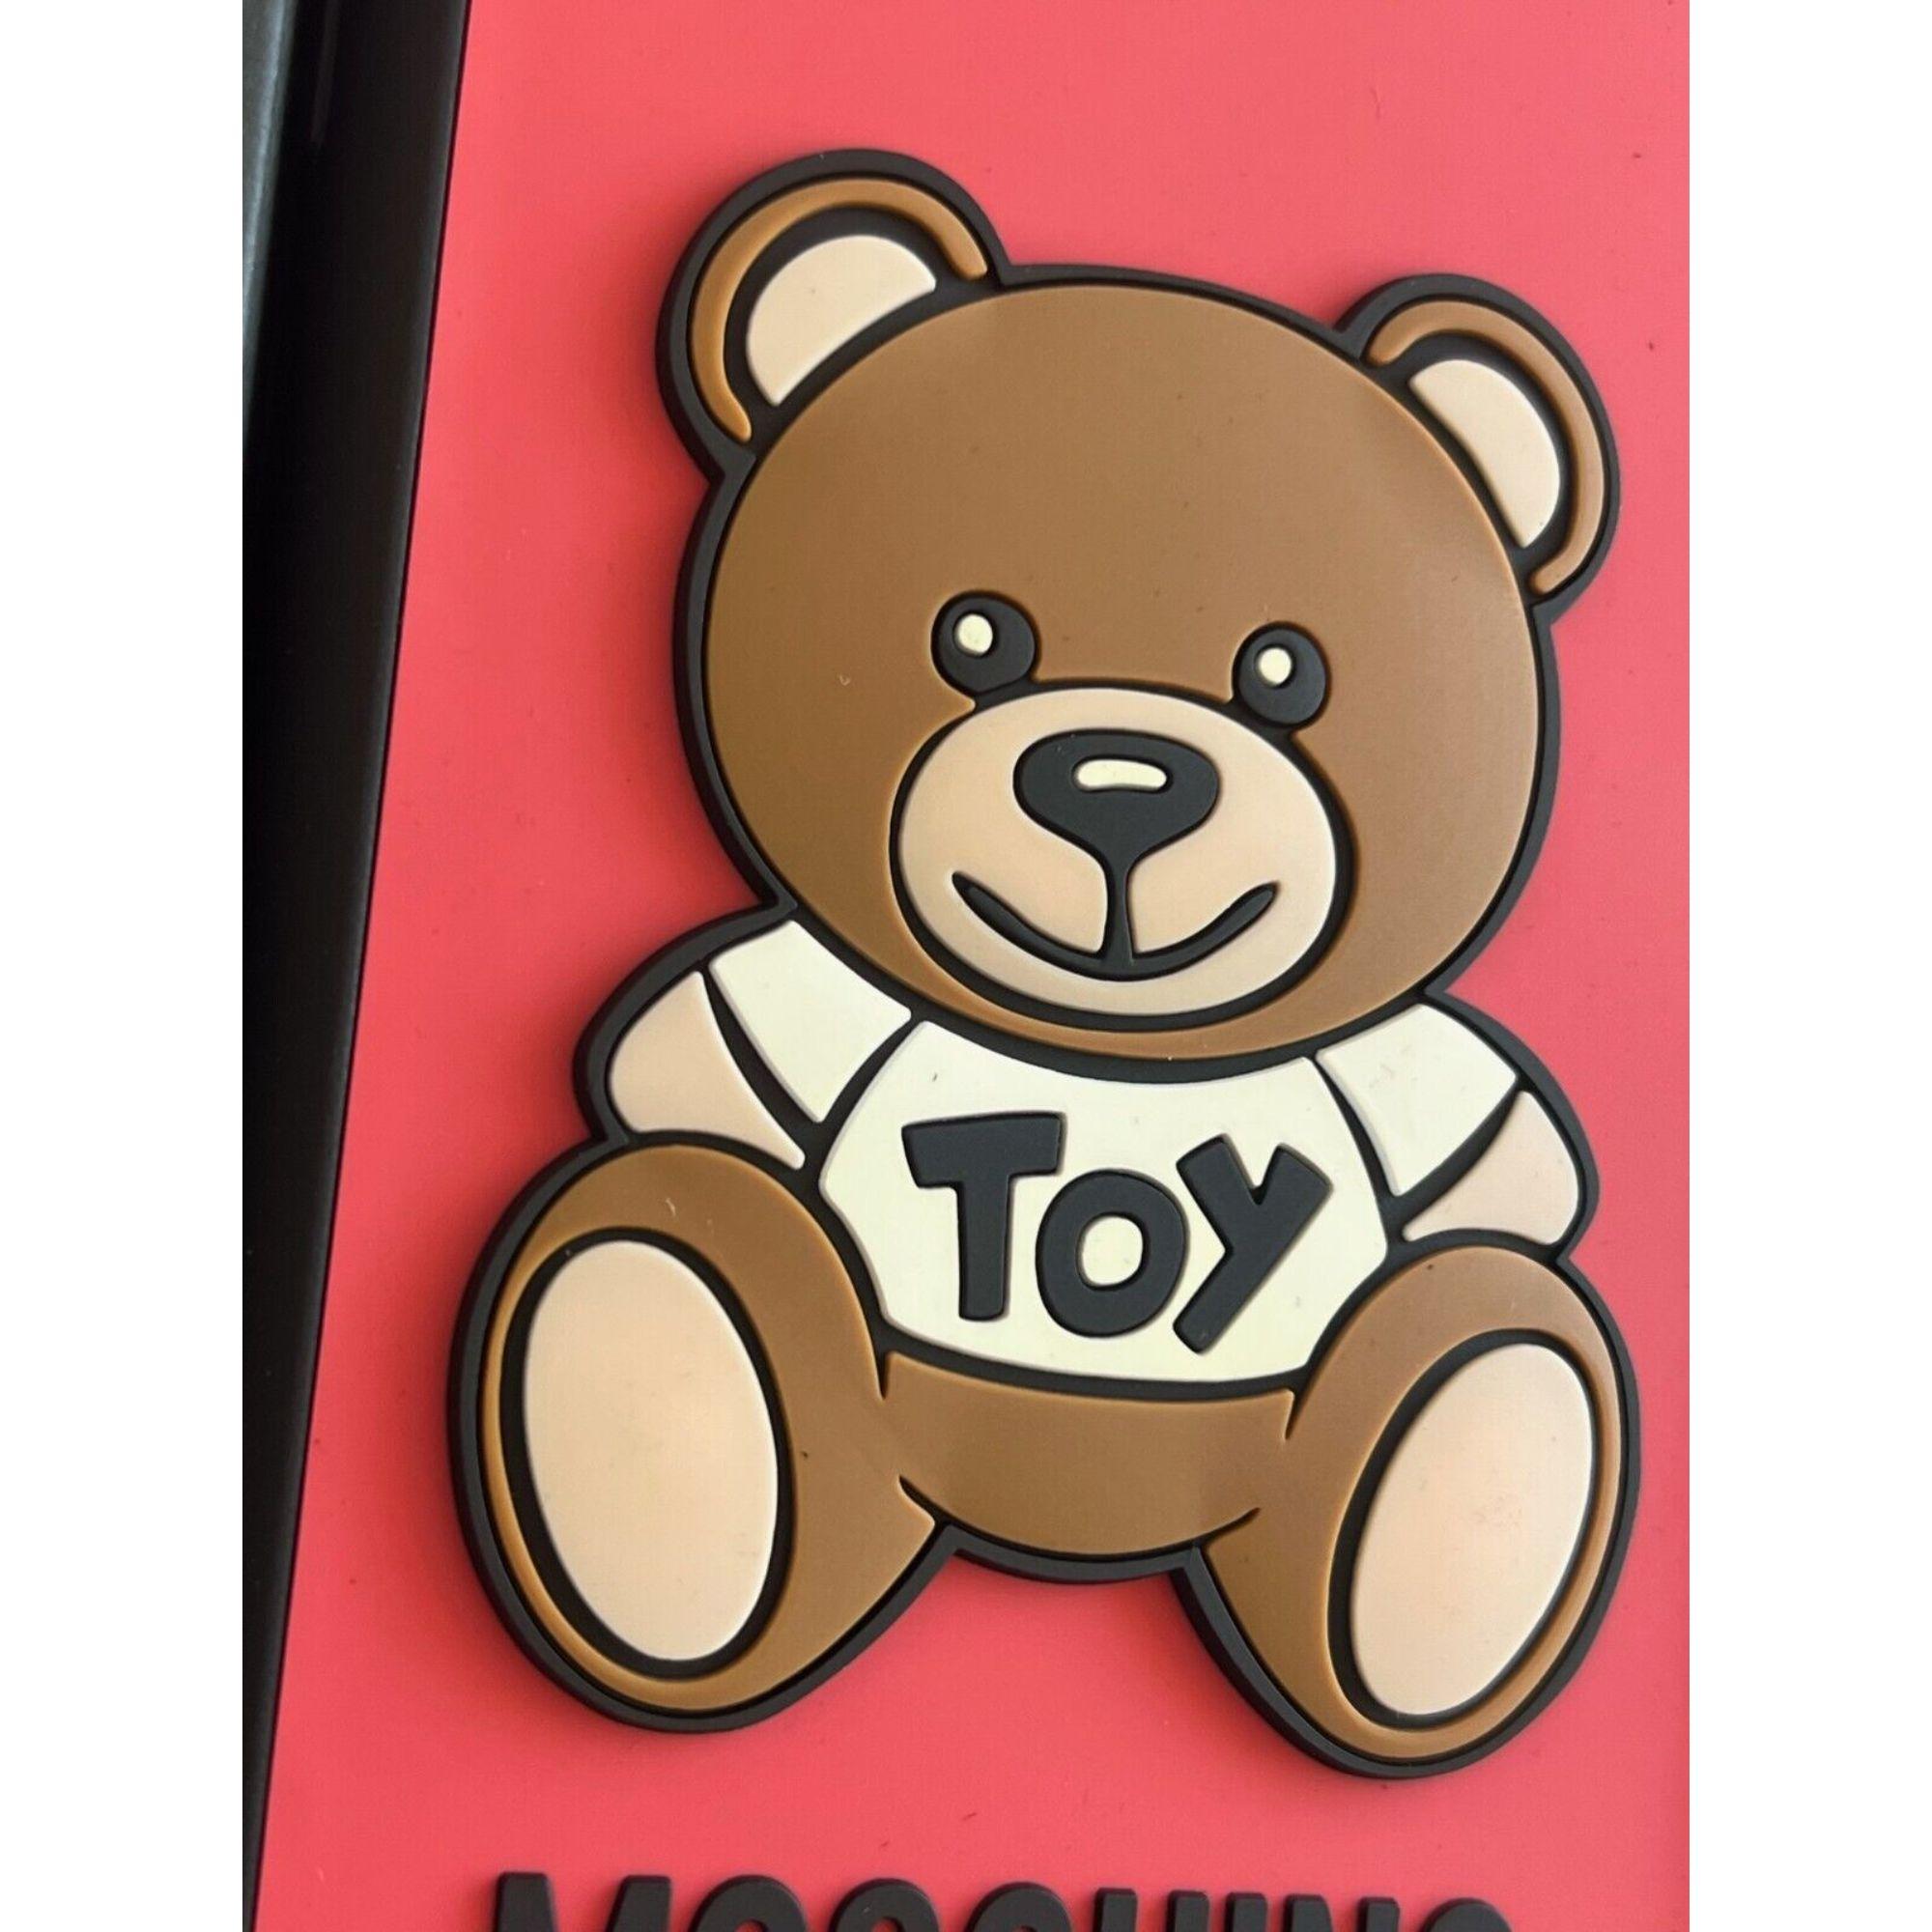 Women's or Men's SS21 Moschino Couture Red iPhone XS Max Case with Teddy Bear Toy by Jeremy Scott For Sale